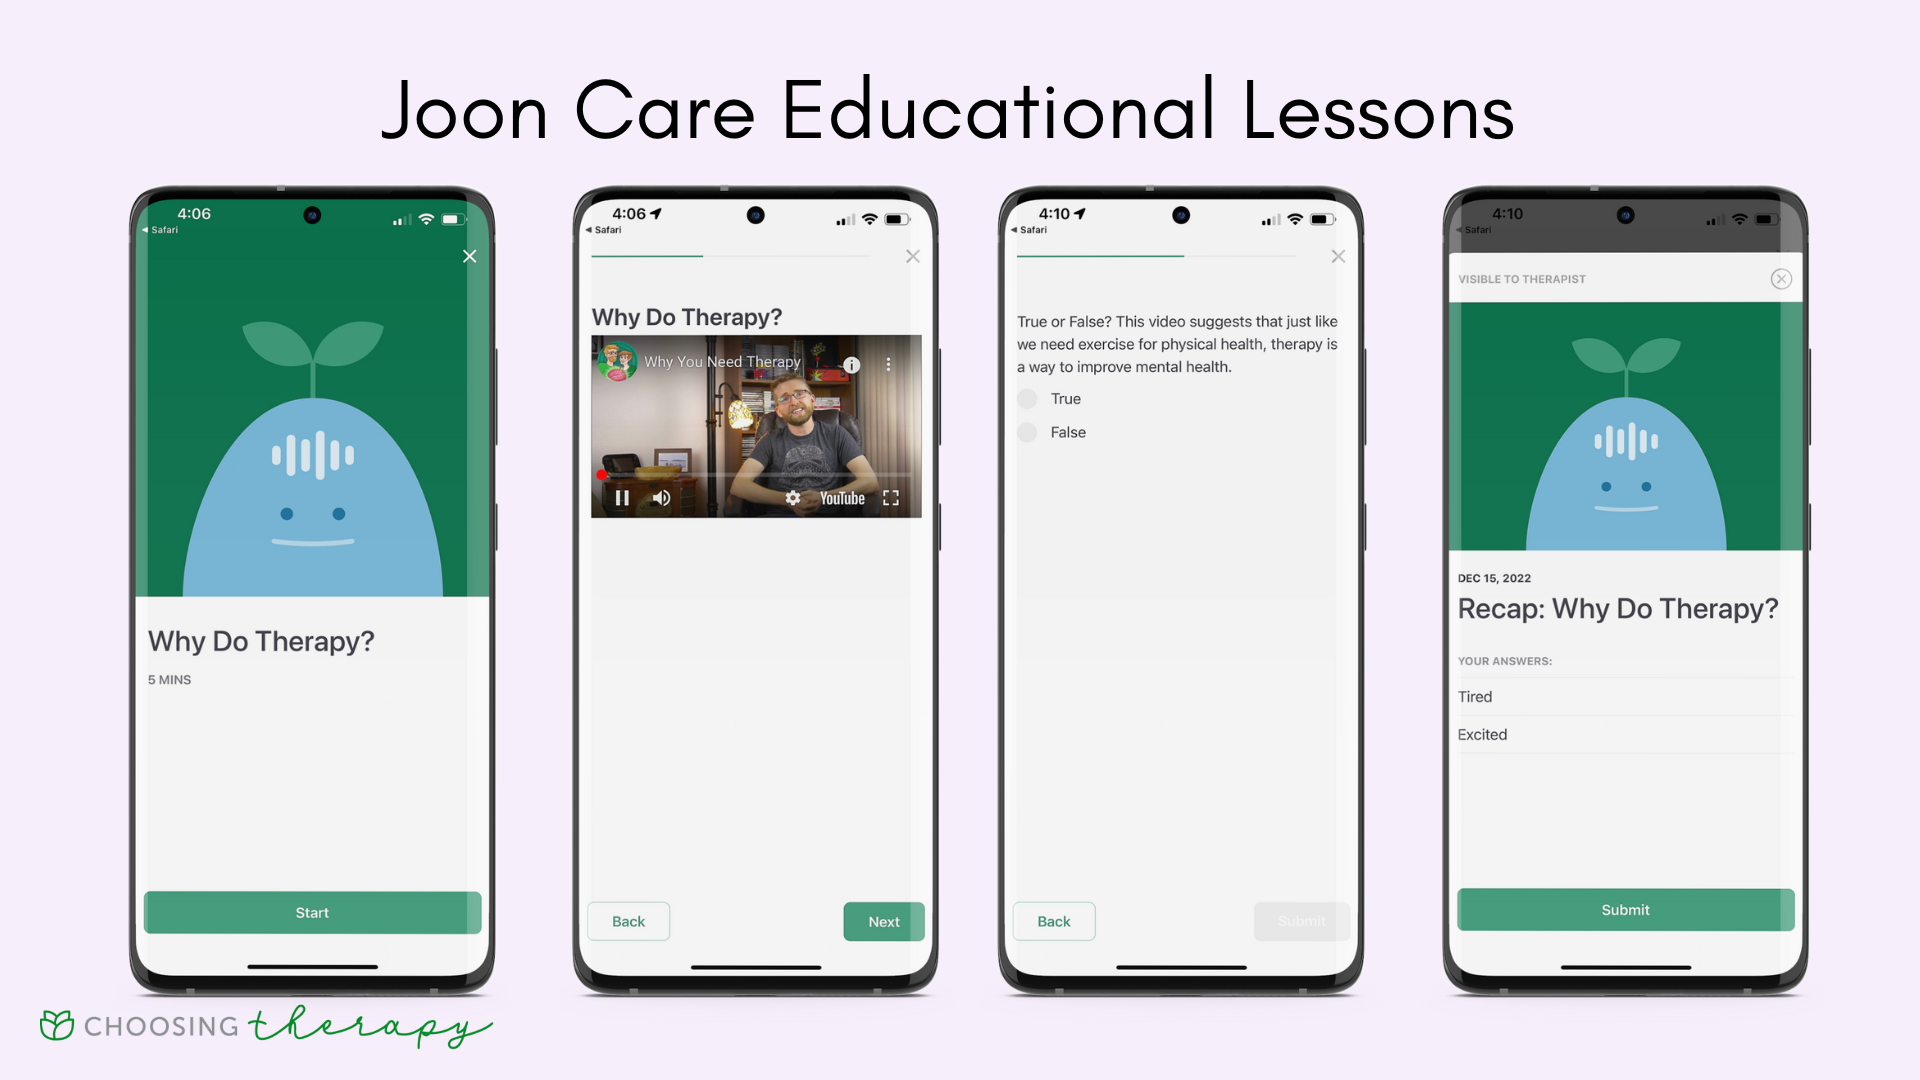 Joon Care Review 2023 - Image of the Joon Care self-care lessons and homework, featured is Why Do Therapy